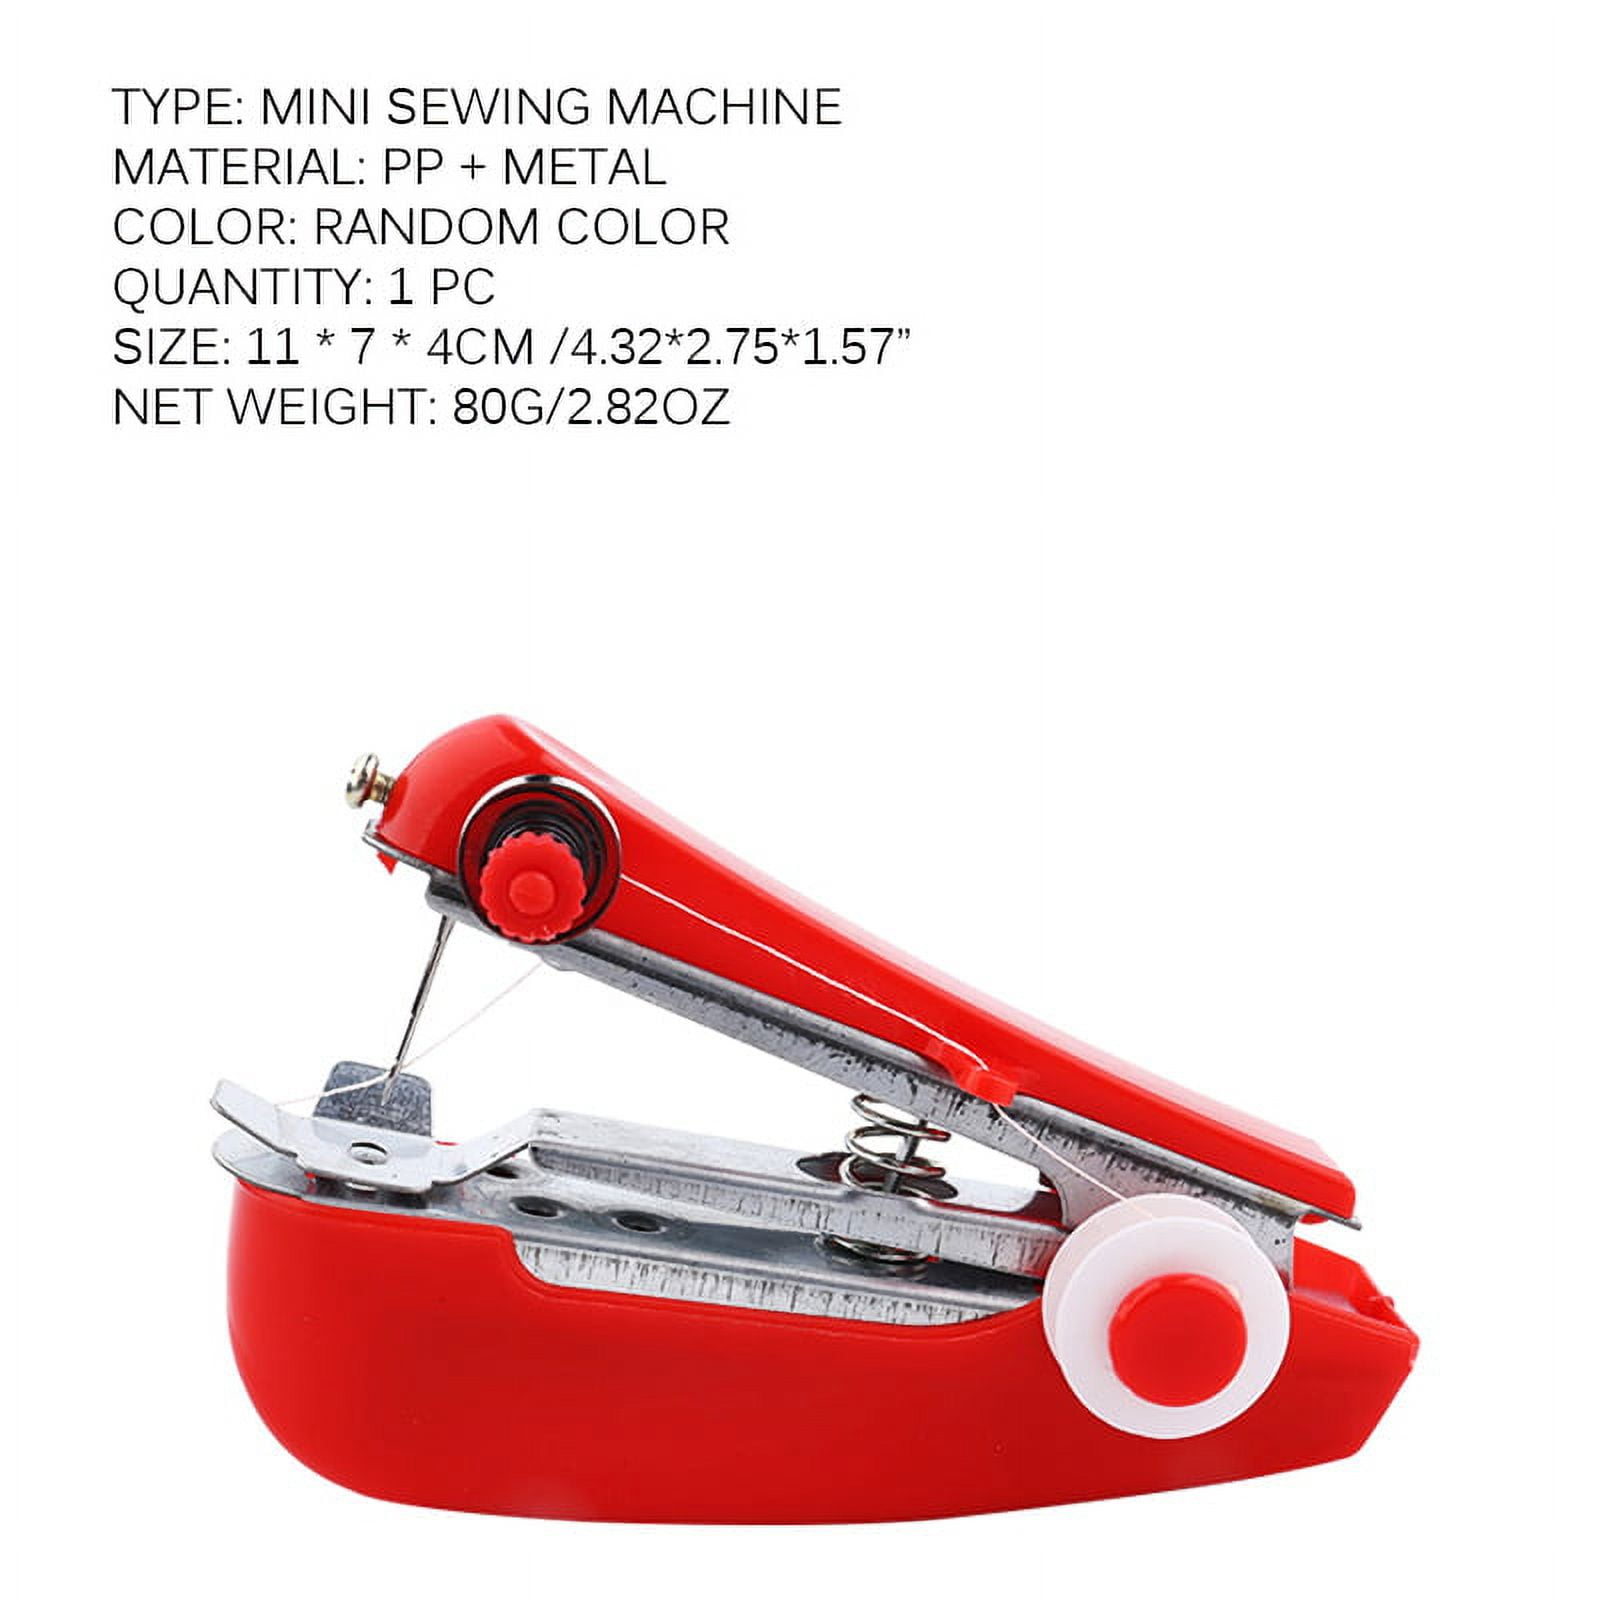 Buy Mini Hand Sewing & Sealing Machine for Quick and Easy Sewing, Stapler  Style Compact Stitching Machine - Multicolored Manual Sewing Machine (  Built-in Stitches 1) at Sehgall